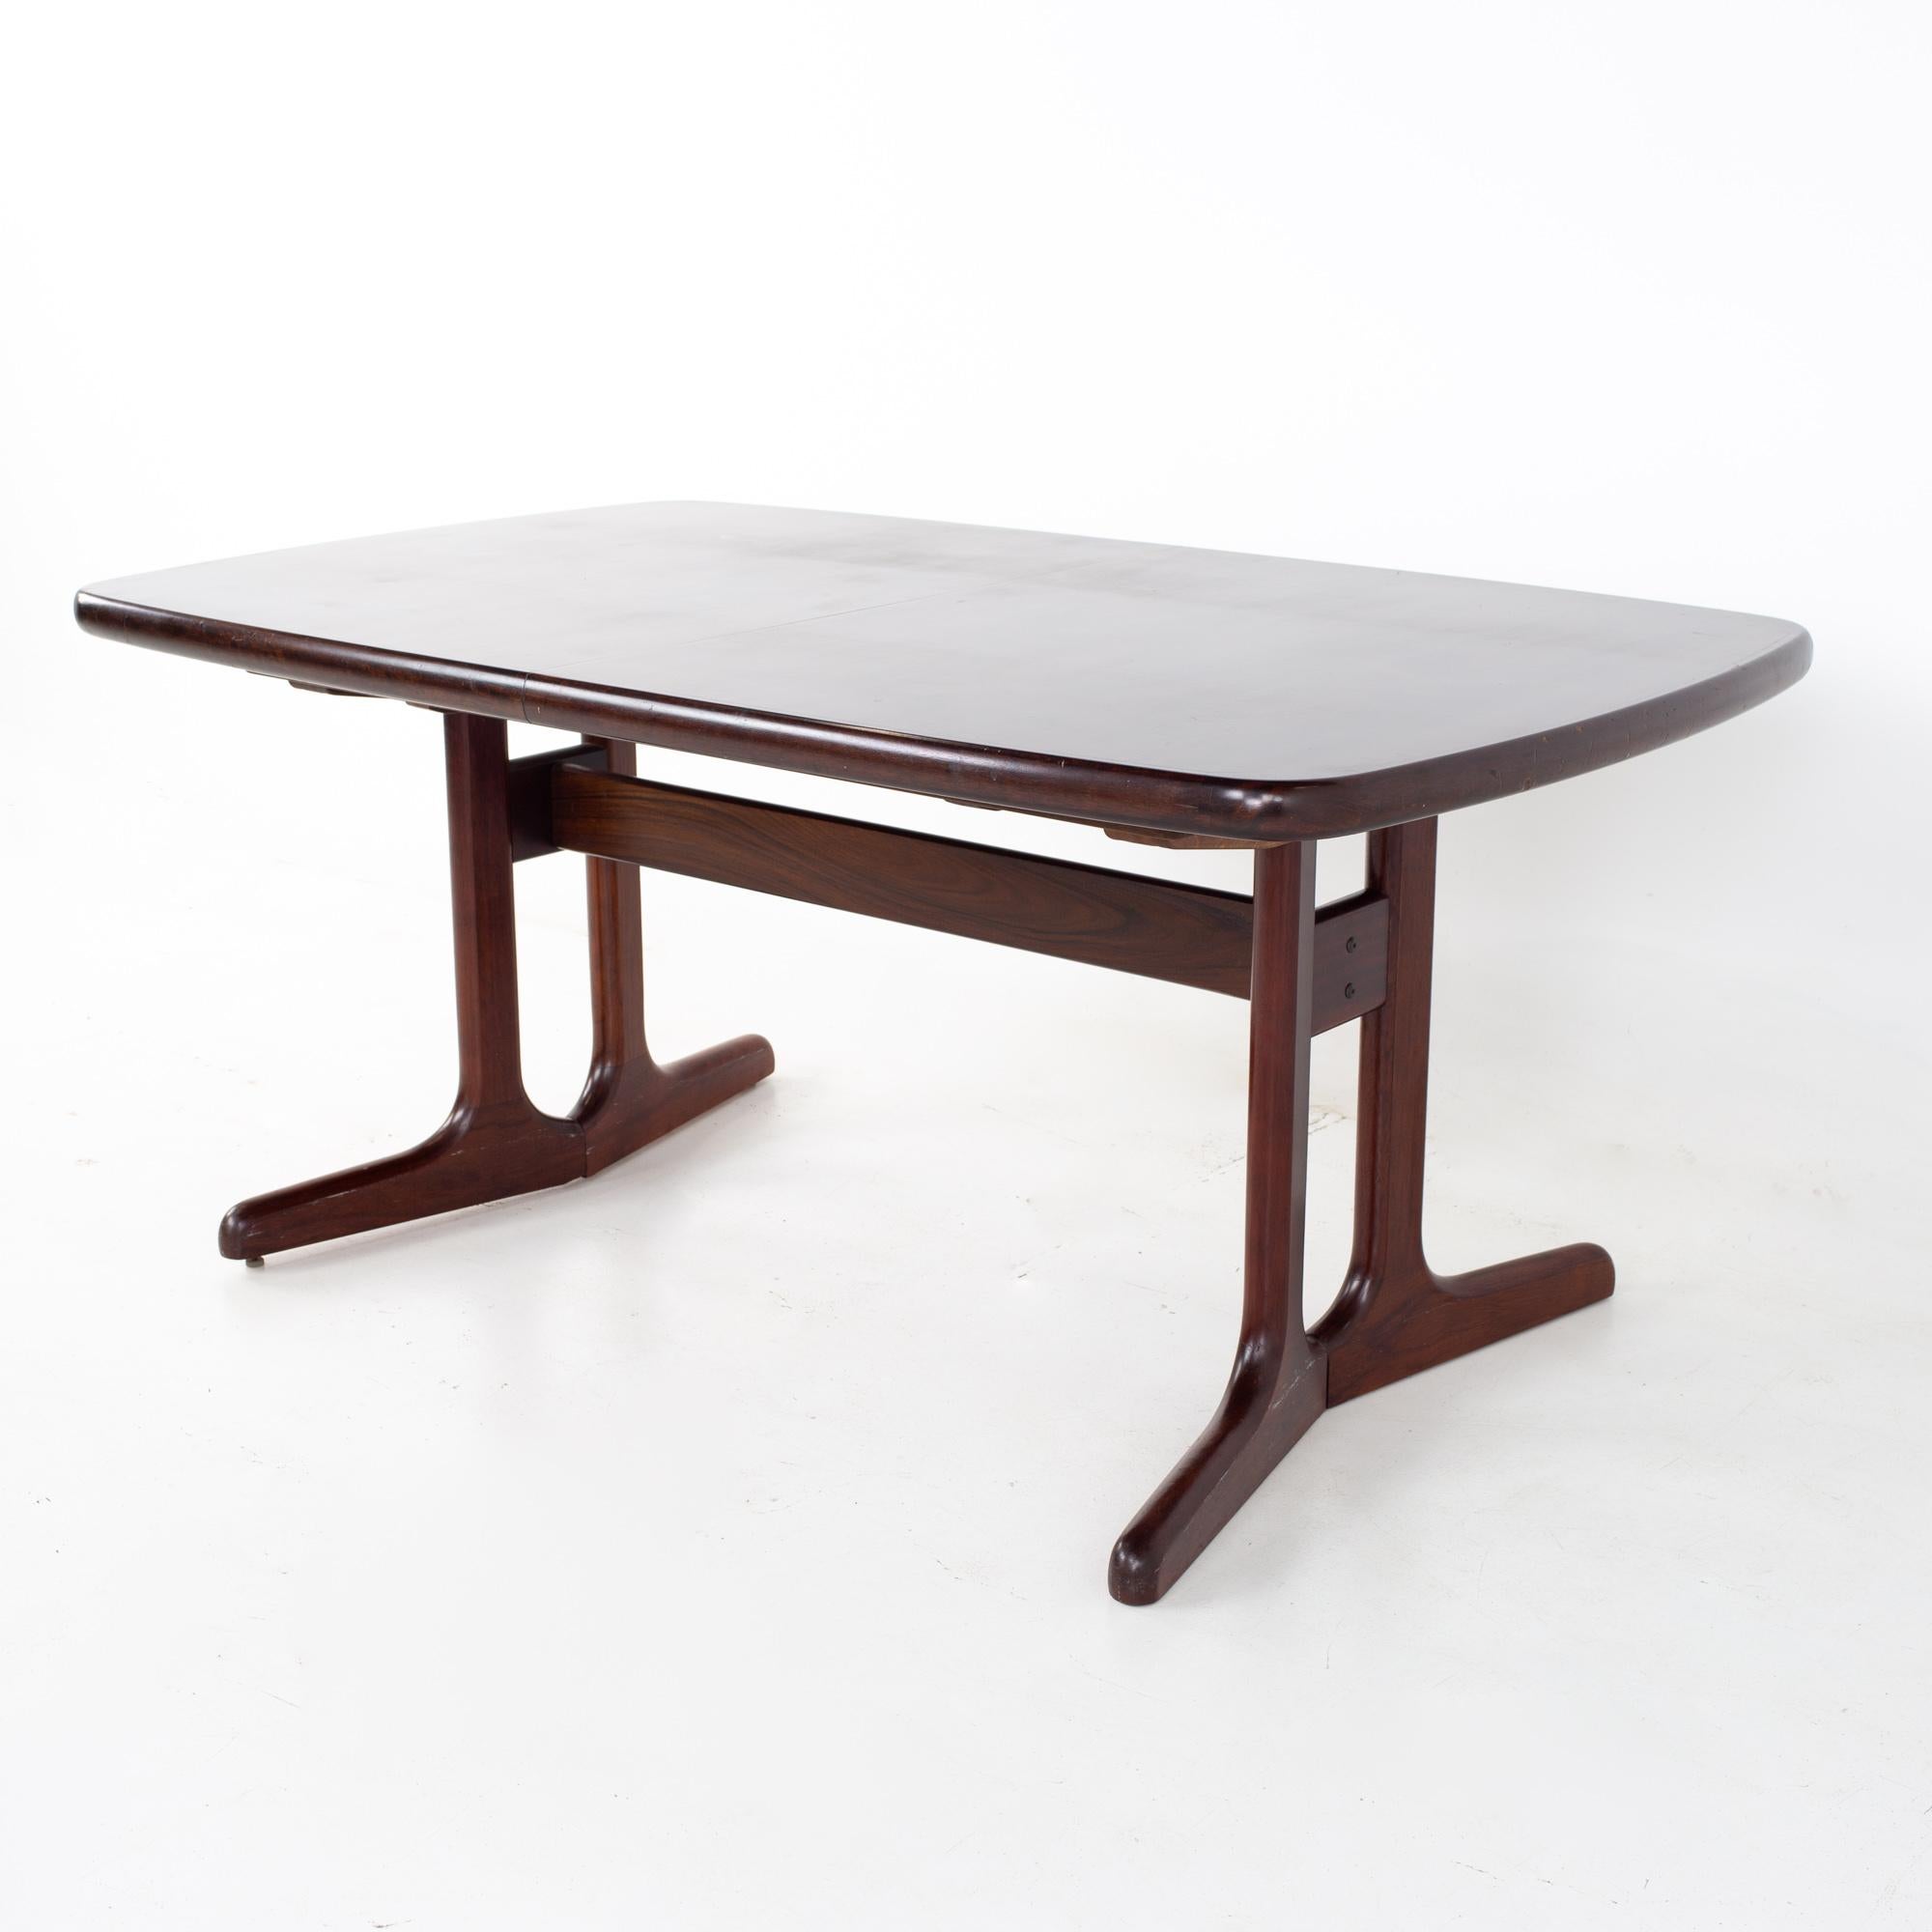 Mid century rosewood oval dining table
Table measures: 65 wide x 39.25 deep x 28.75 inches high

All pieces of furniture can be had in what we call restored vintage condition. That means the piece is restored upon purchase so it’s free of